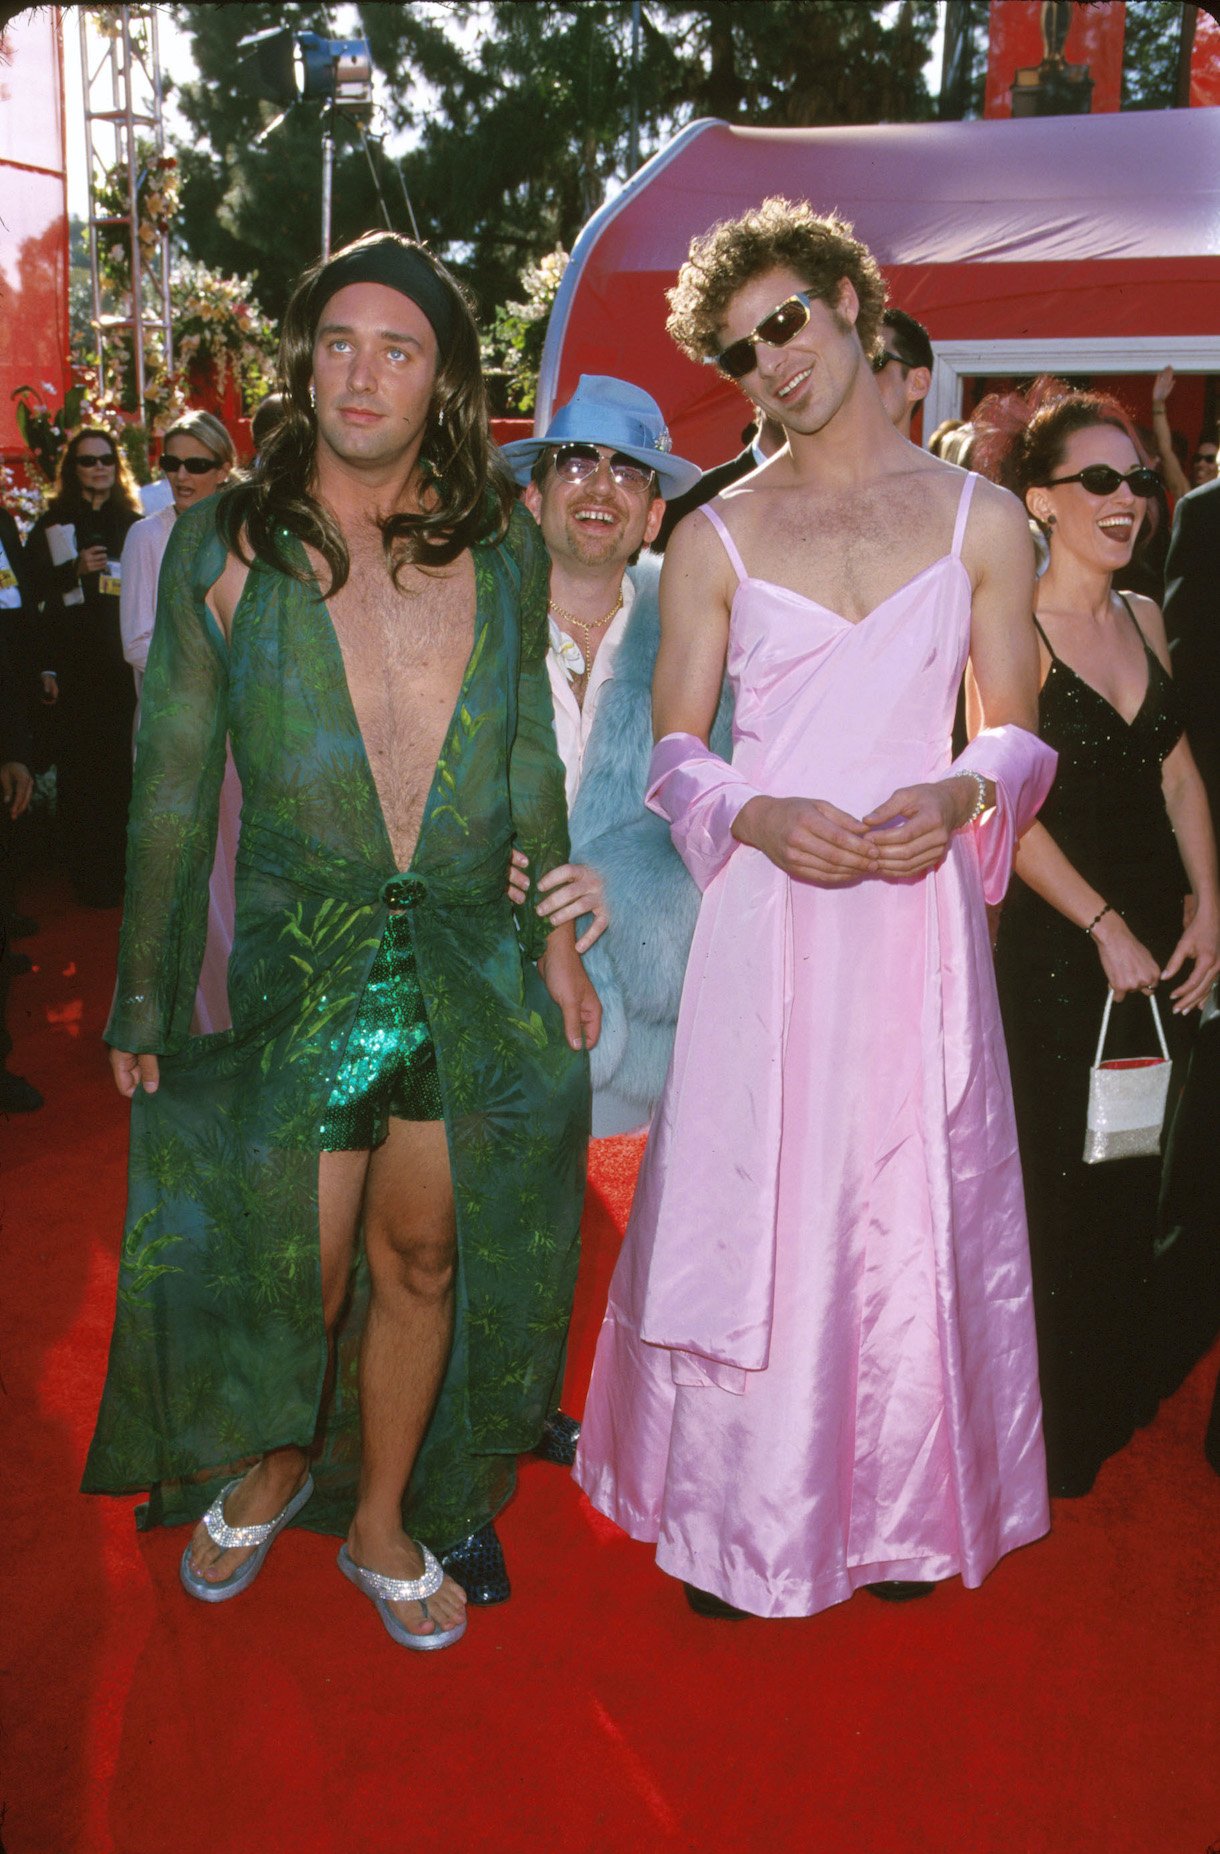 Matt Stone and Trey Parker Once Showed Up to the Oscars Wearing Dresses, While on